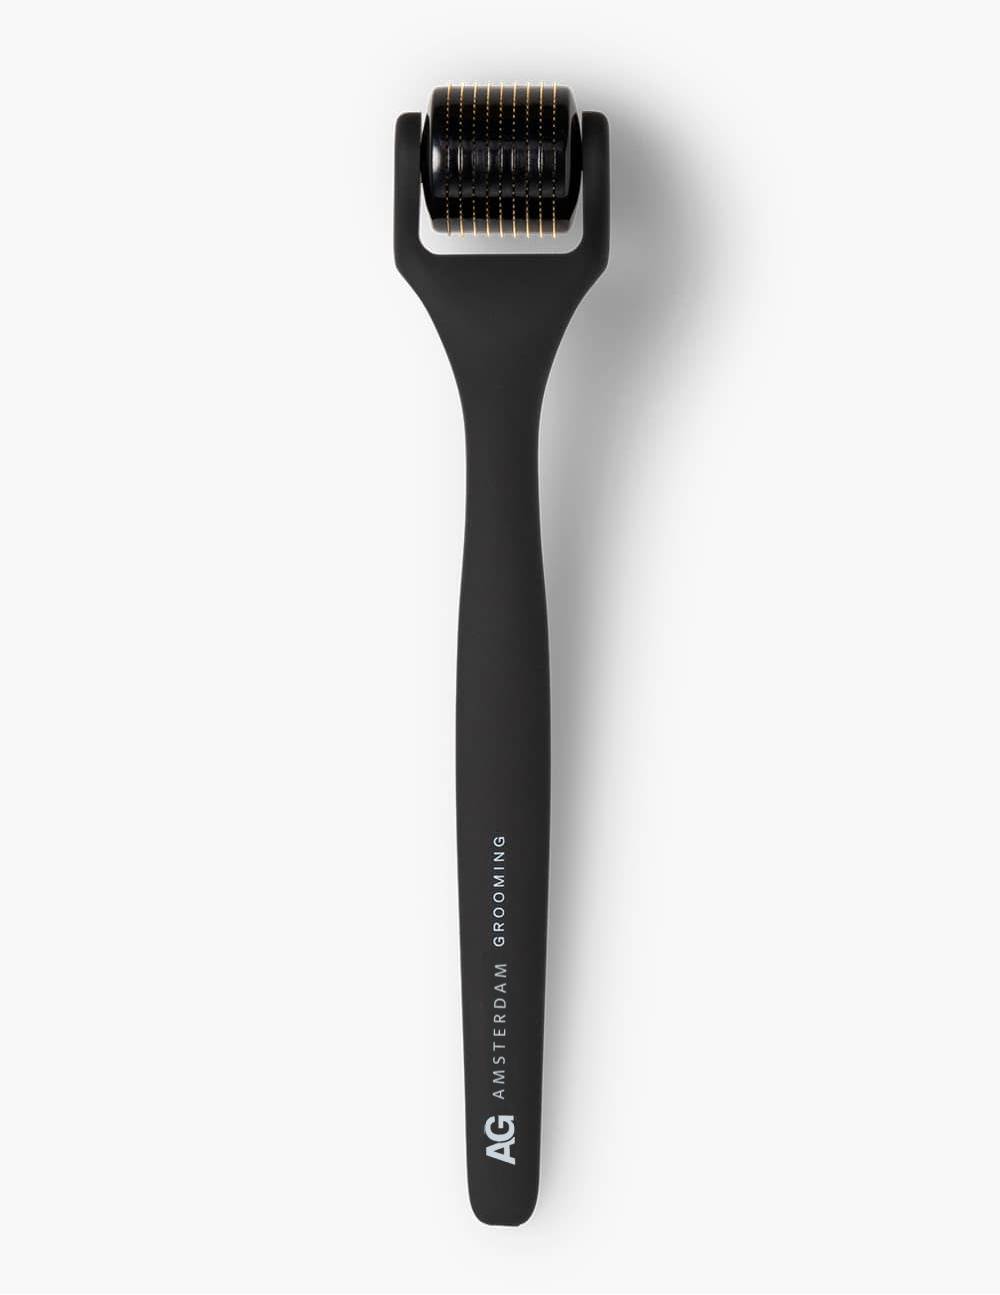 This is the<br /> Beard Roller